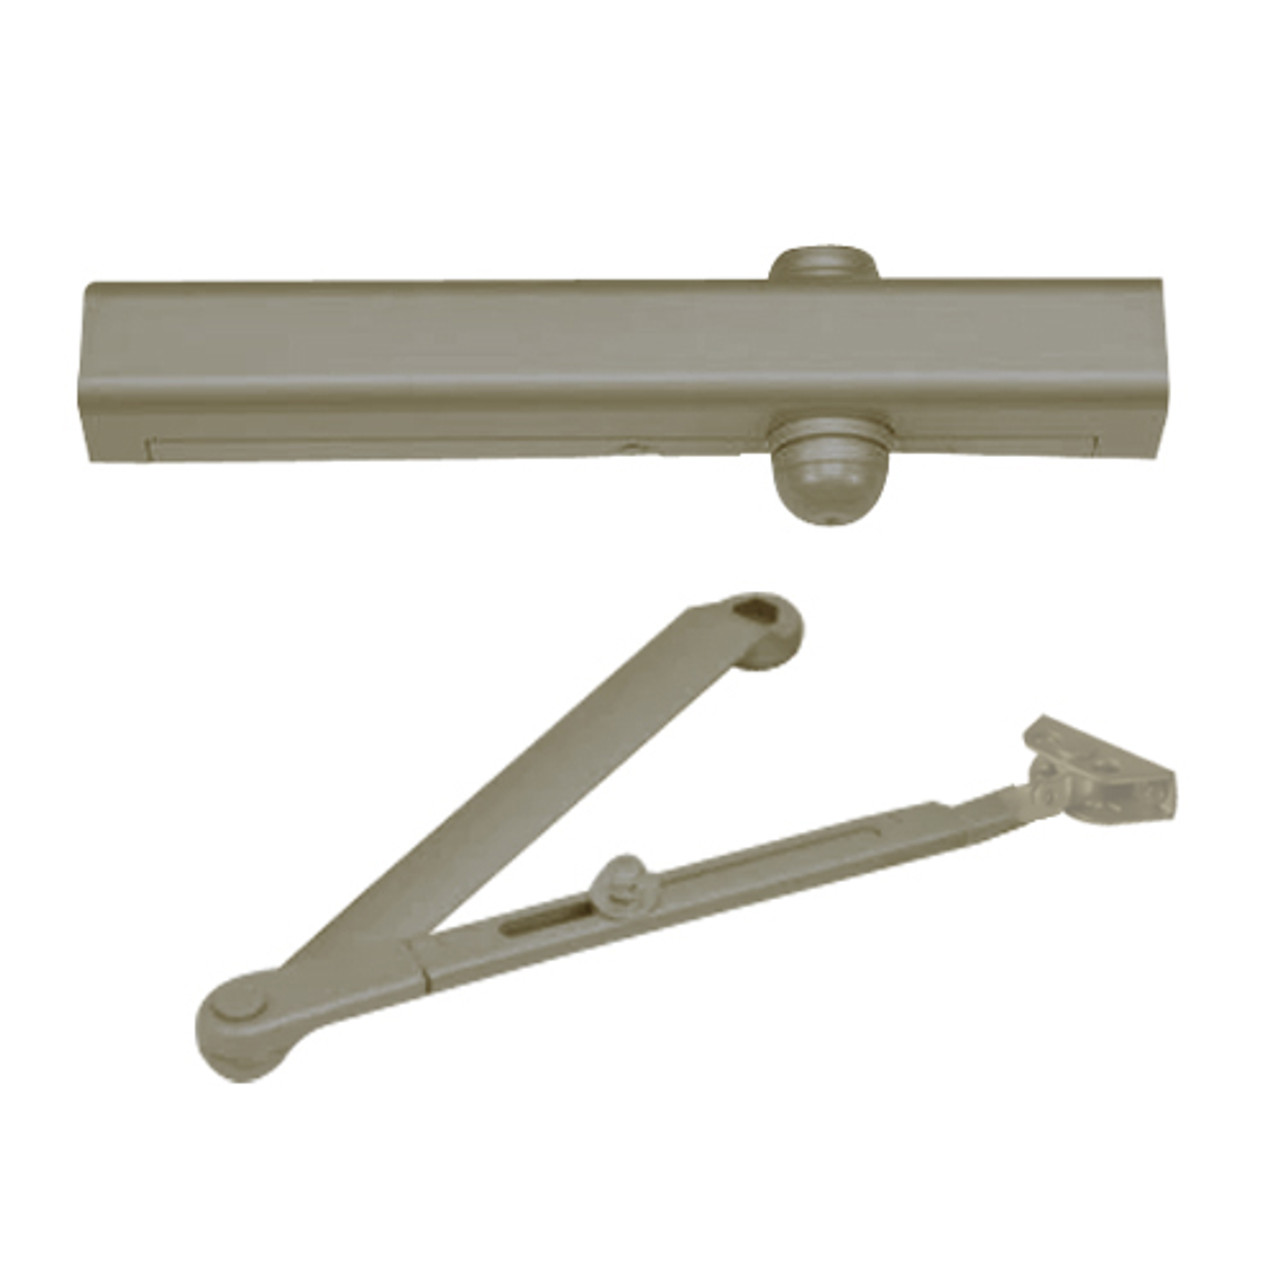 TJ3301-694 Yale 3000 Series Architectural Door Closer with Top Jamb 2-3/4" to 7" Reveal in Medium Bronze